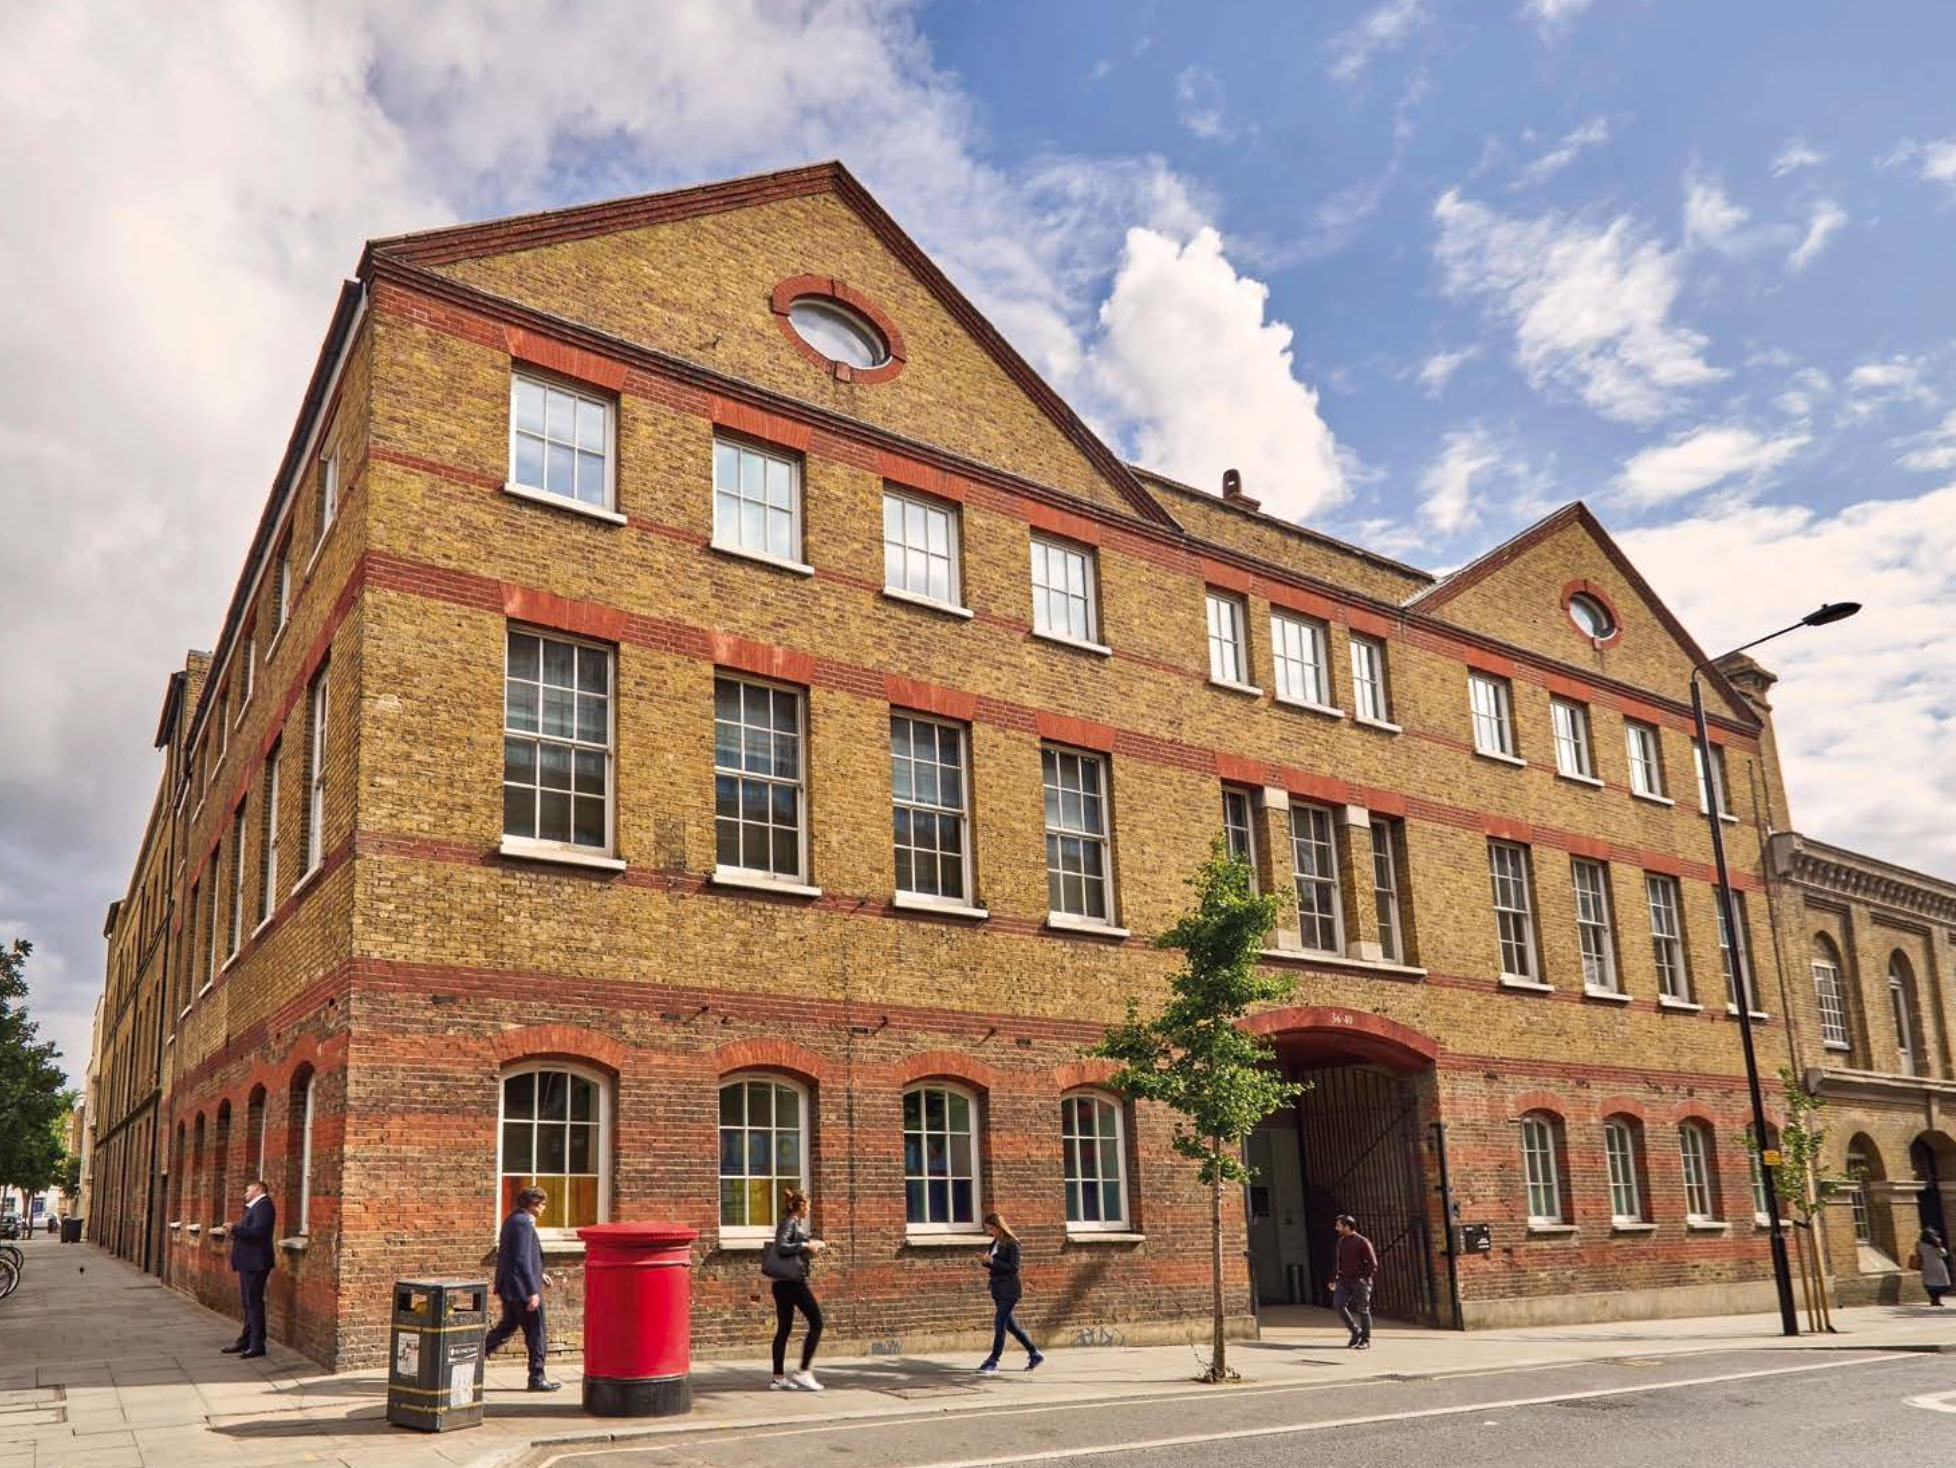 The Mills Fabrica in Cottam House, King's Cross, London